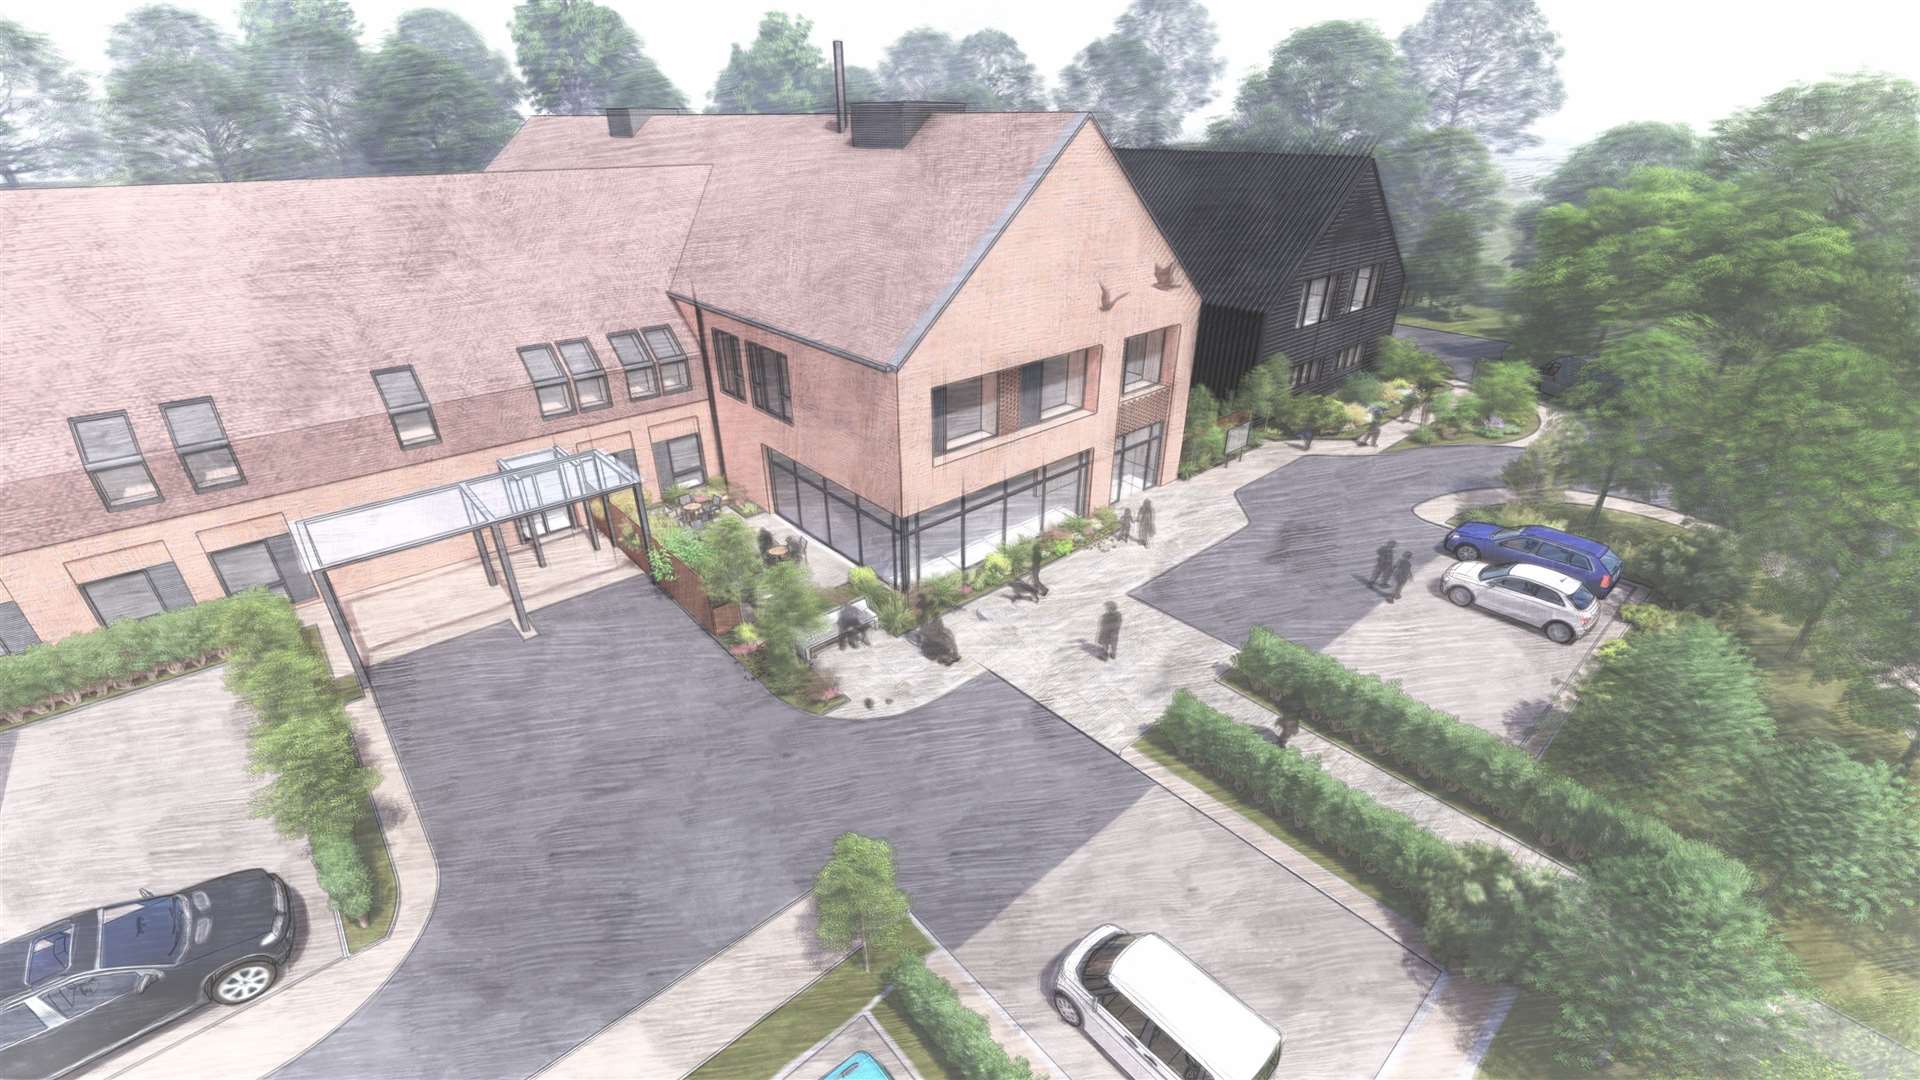 Sketches of the approved hospice building